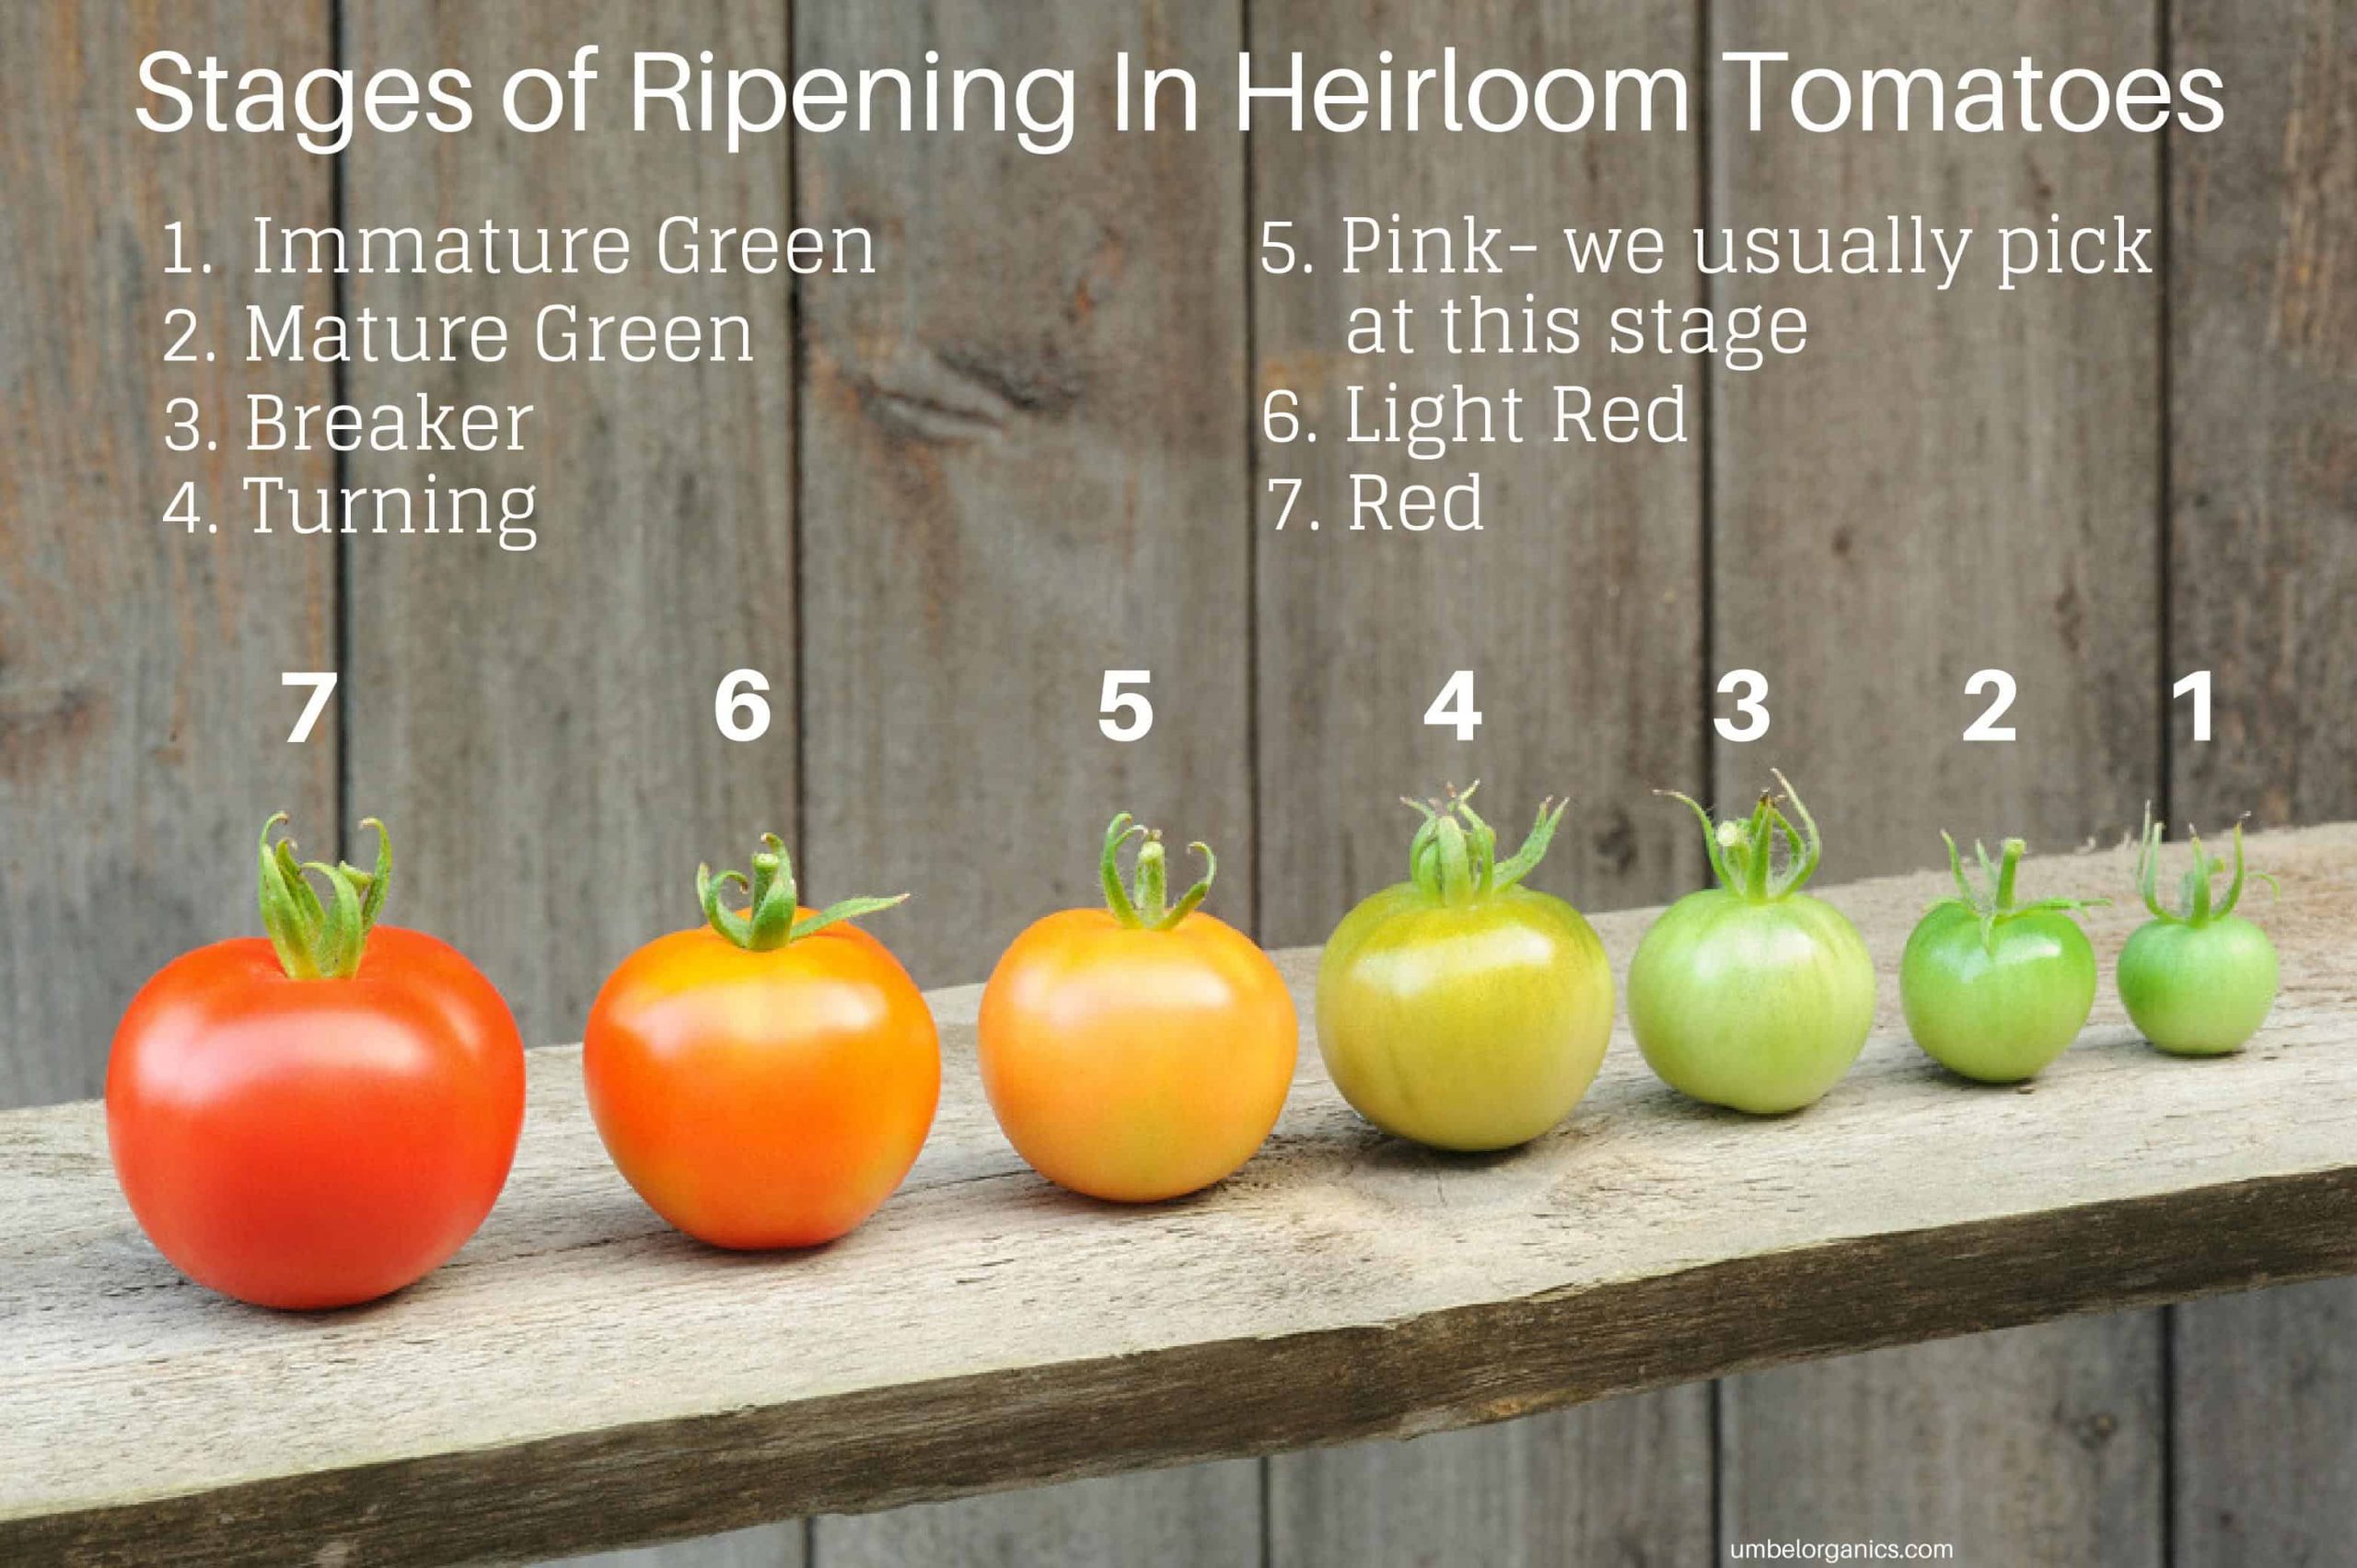 How to Pick Heirloom Tomatoes